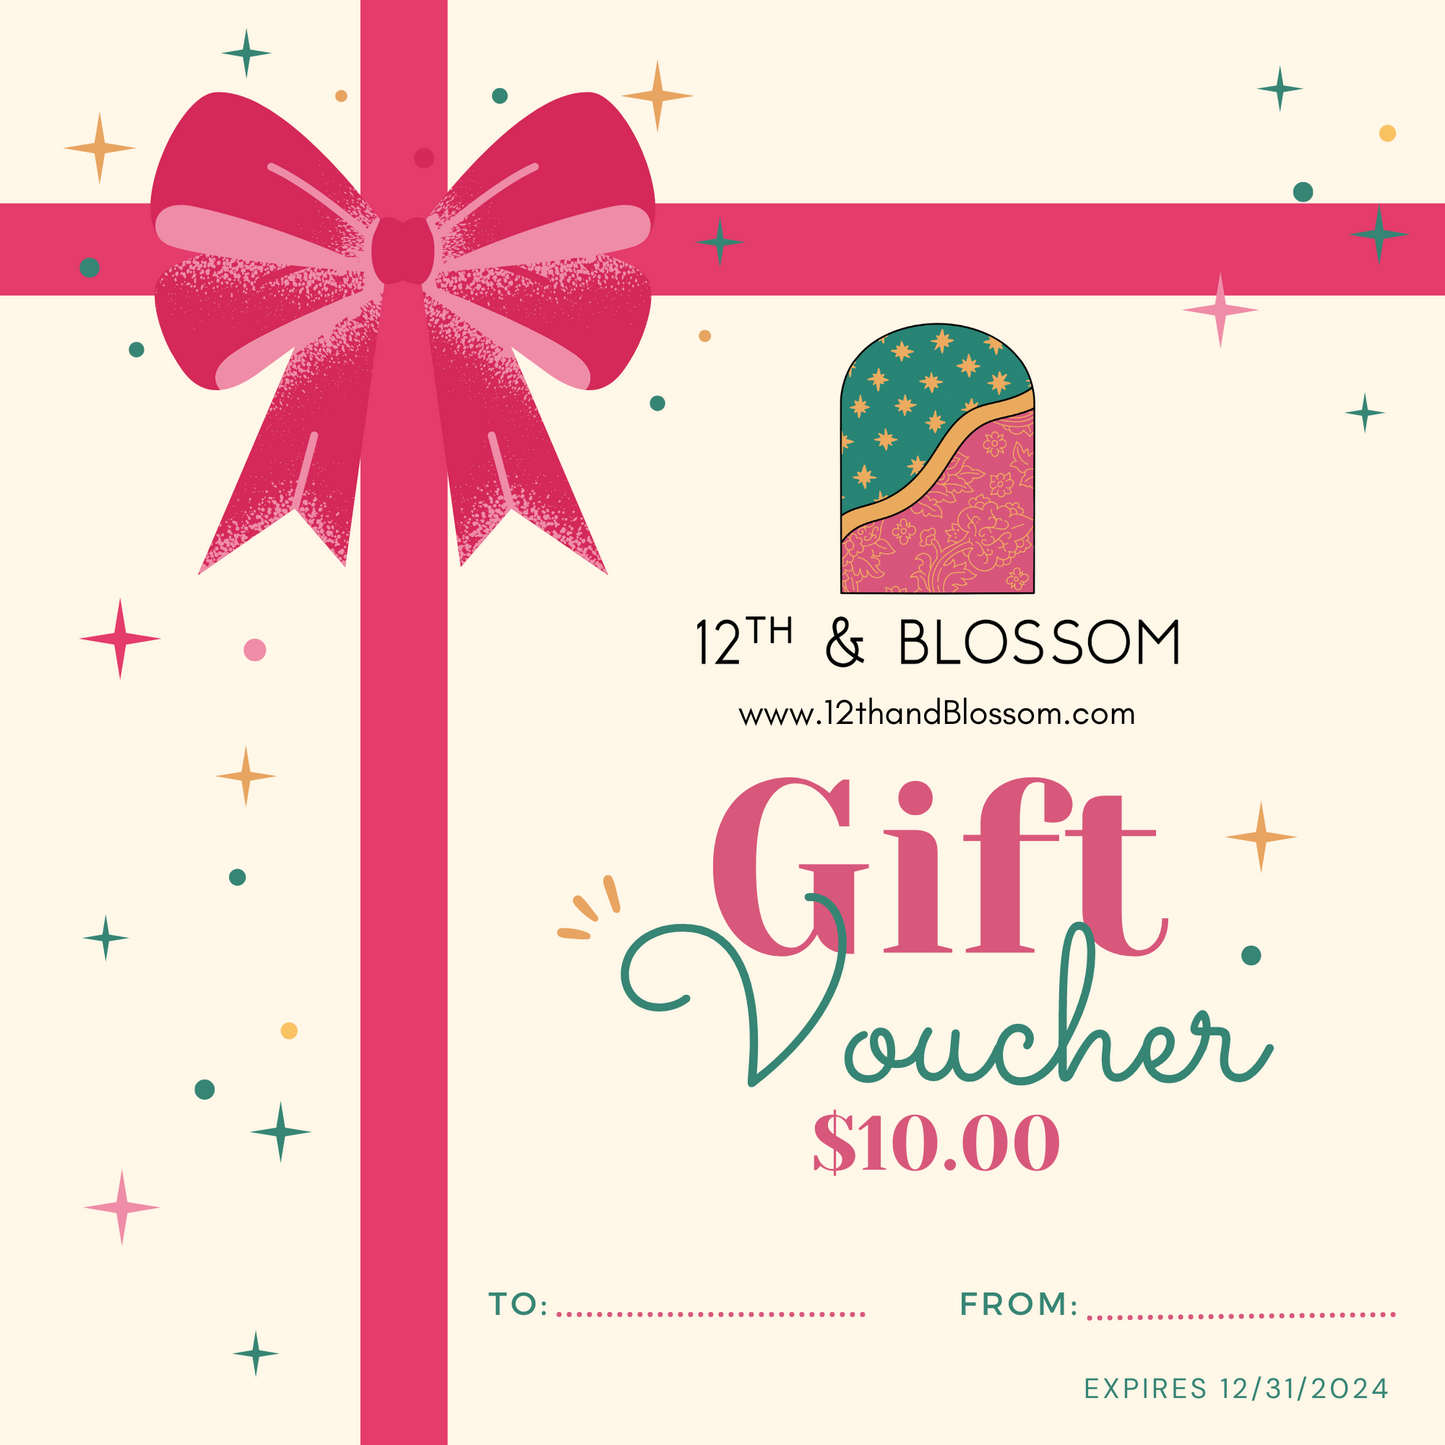 12th and Blossom Gift Card